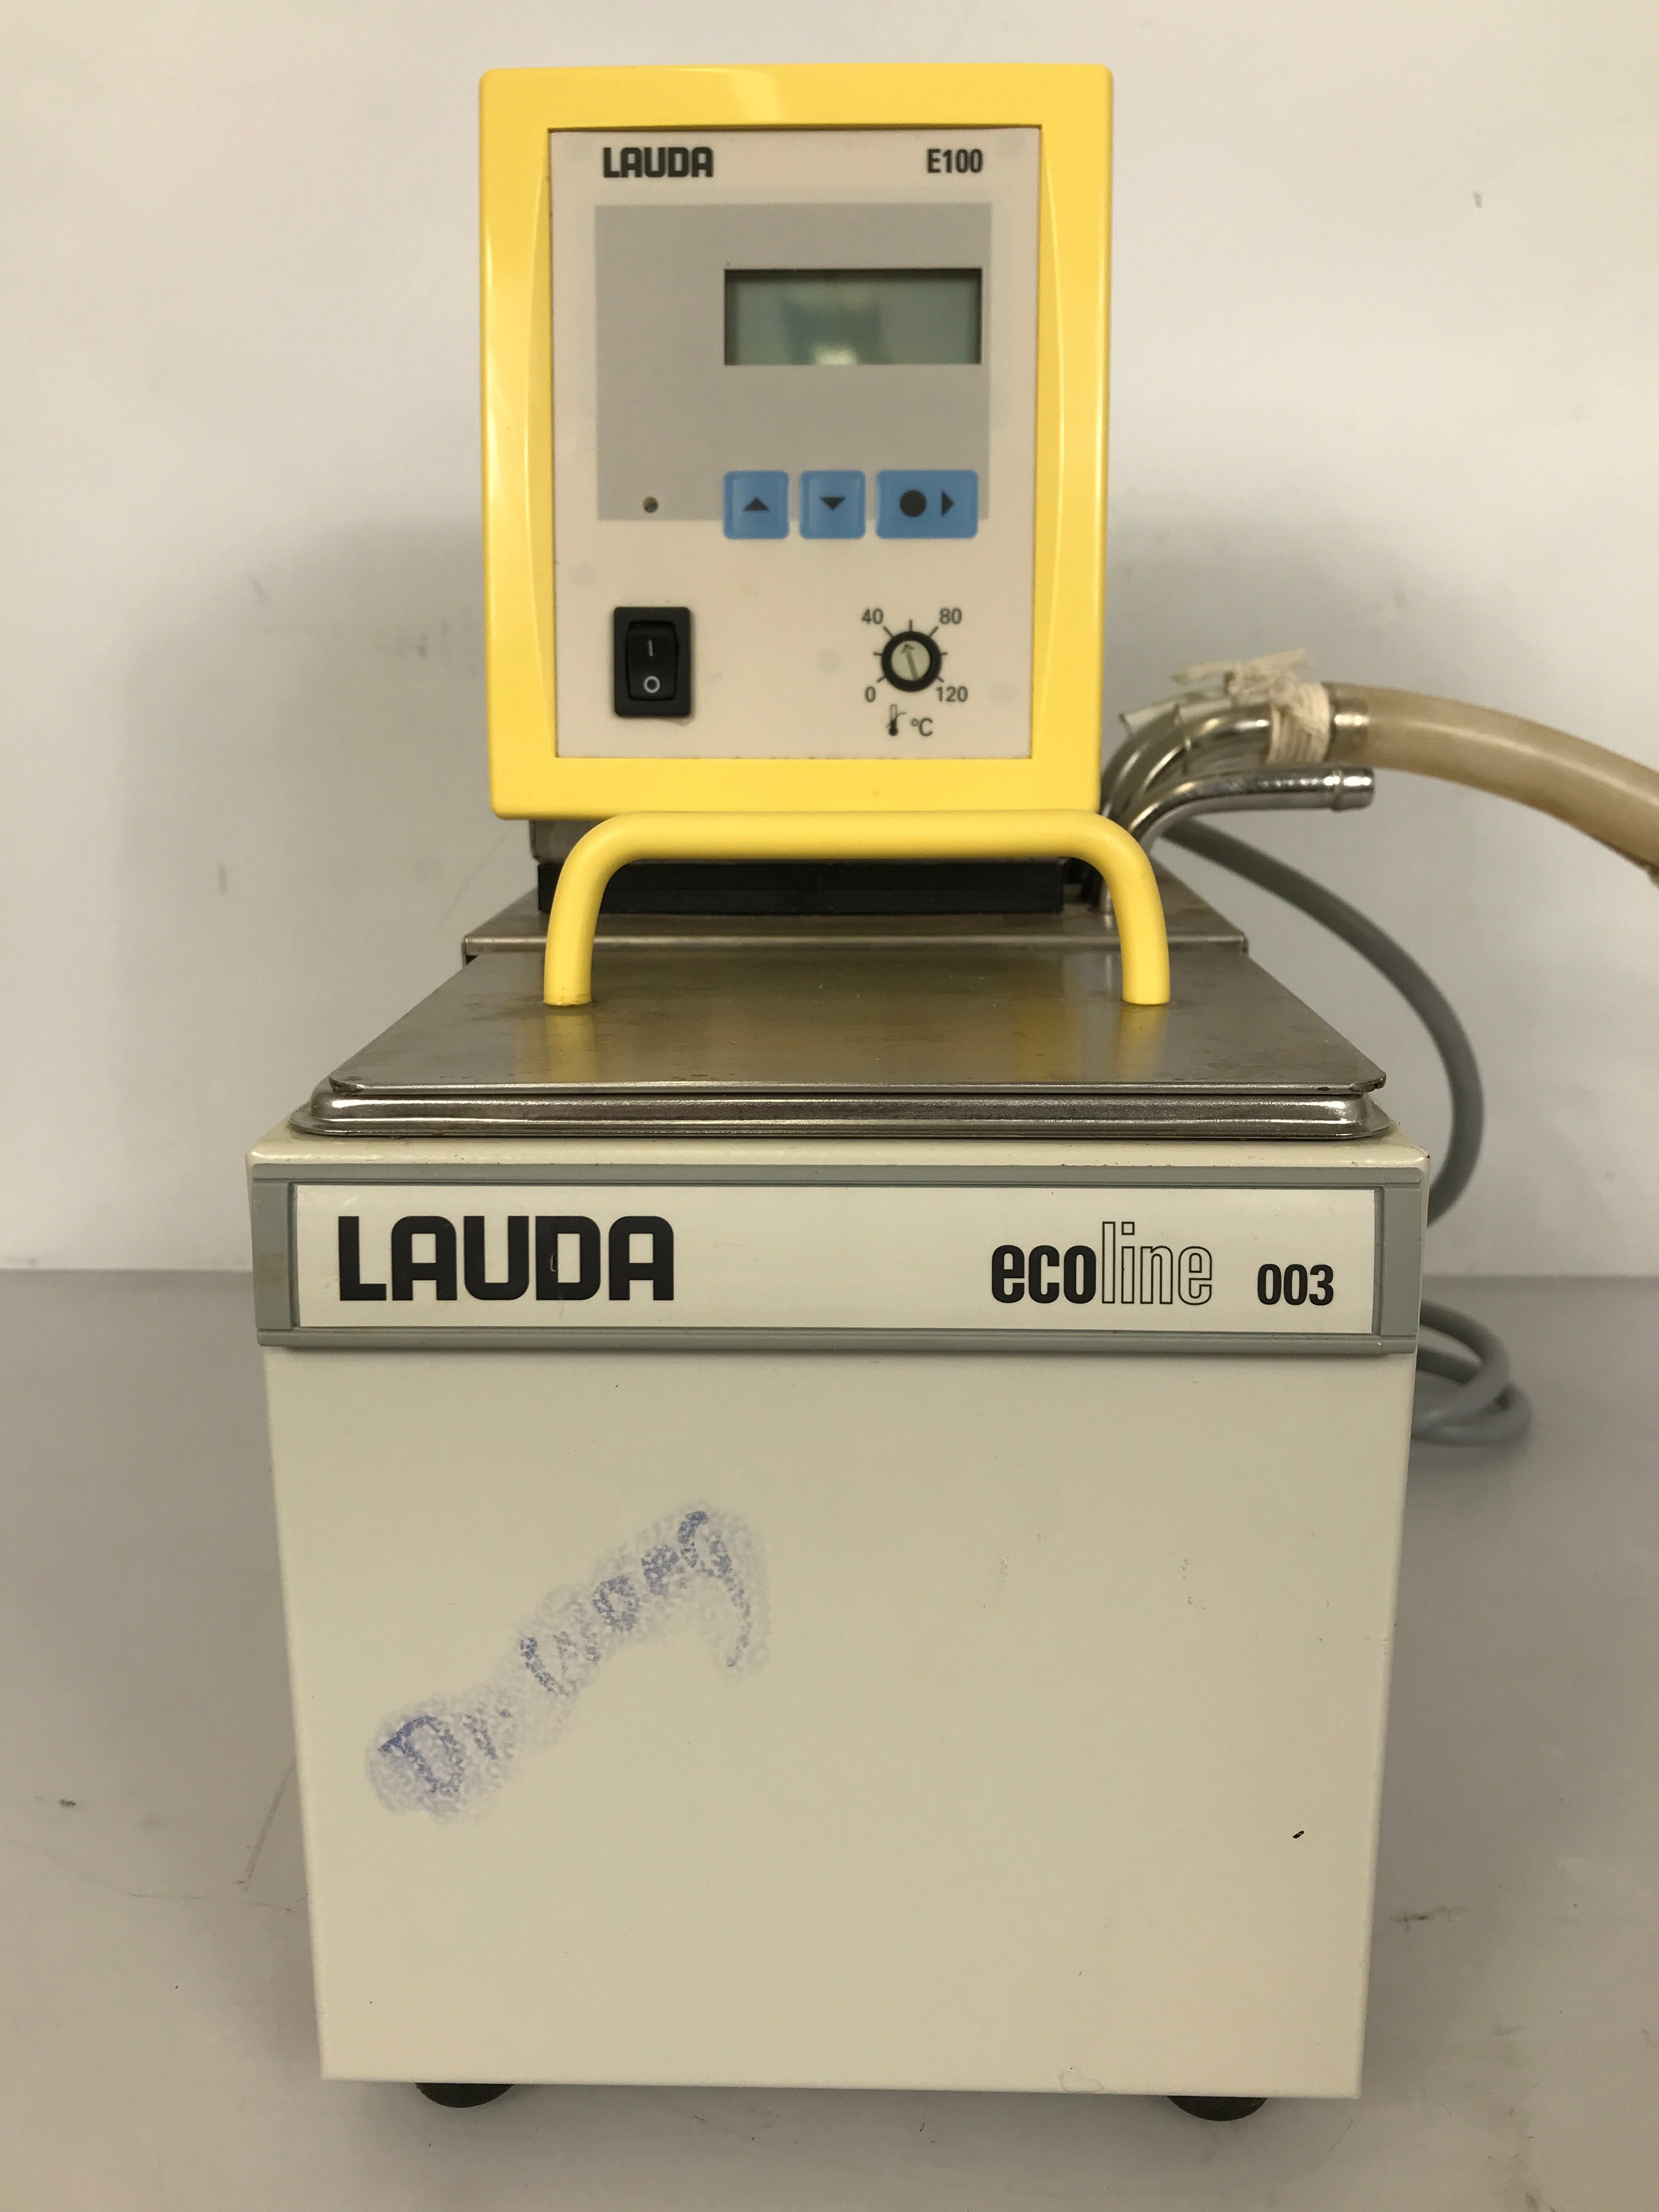 Lauda E100 Thermostat Ecoline 003 Circulating Water Bath Immersion Heater